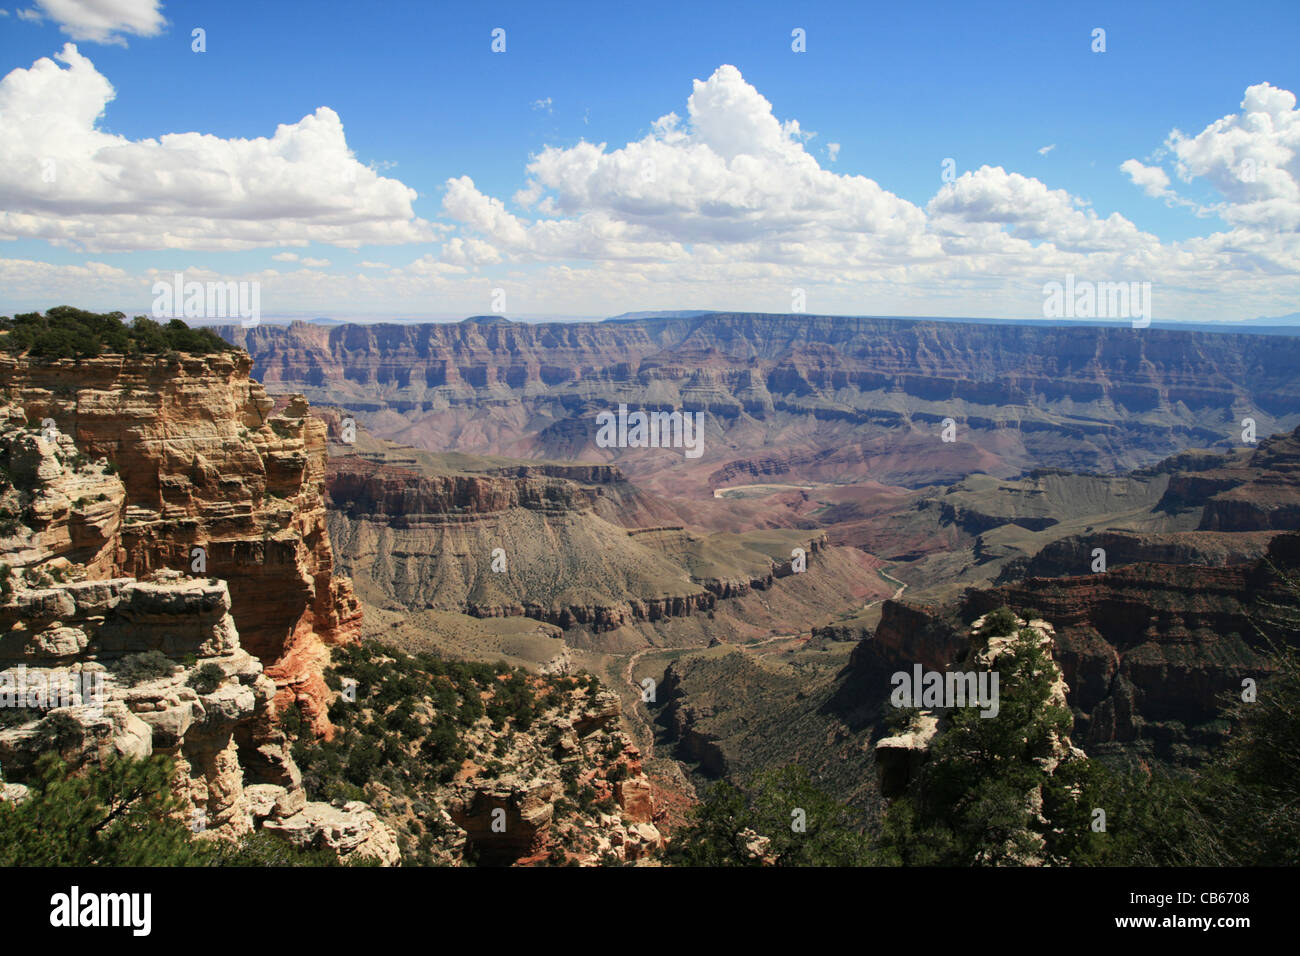 view of the Grand Canyon National Park from the Walhalla overlook on the North Rim, Arizona Stock Photo